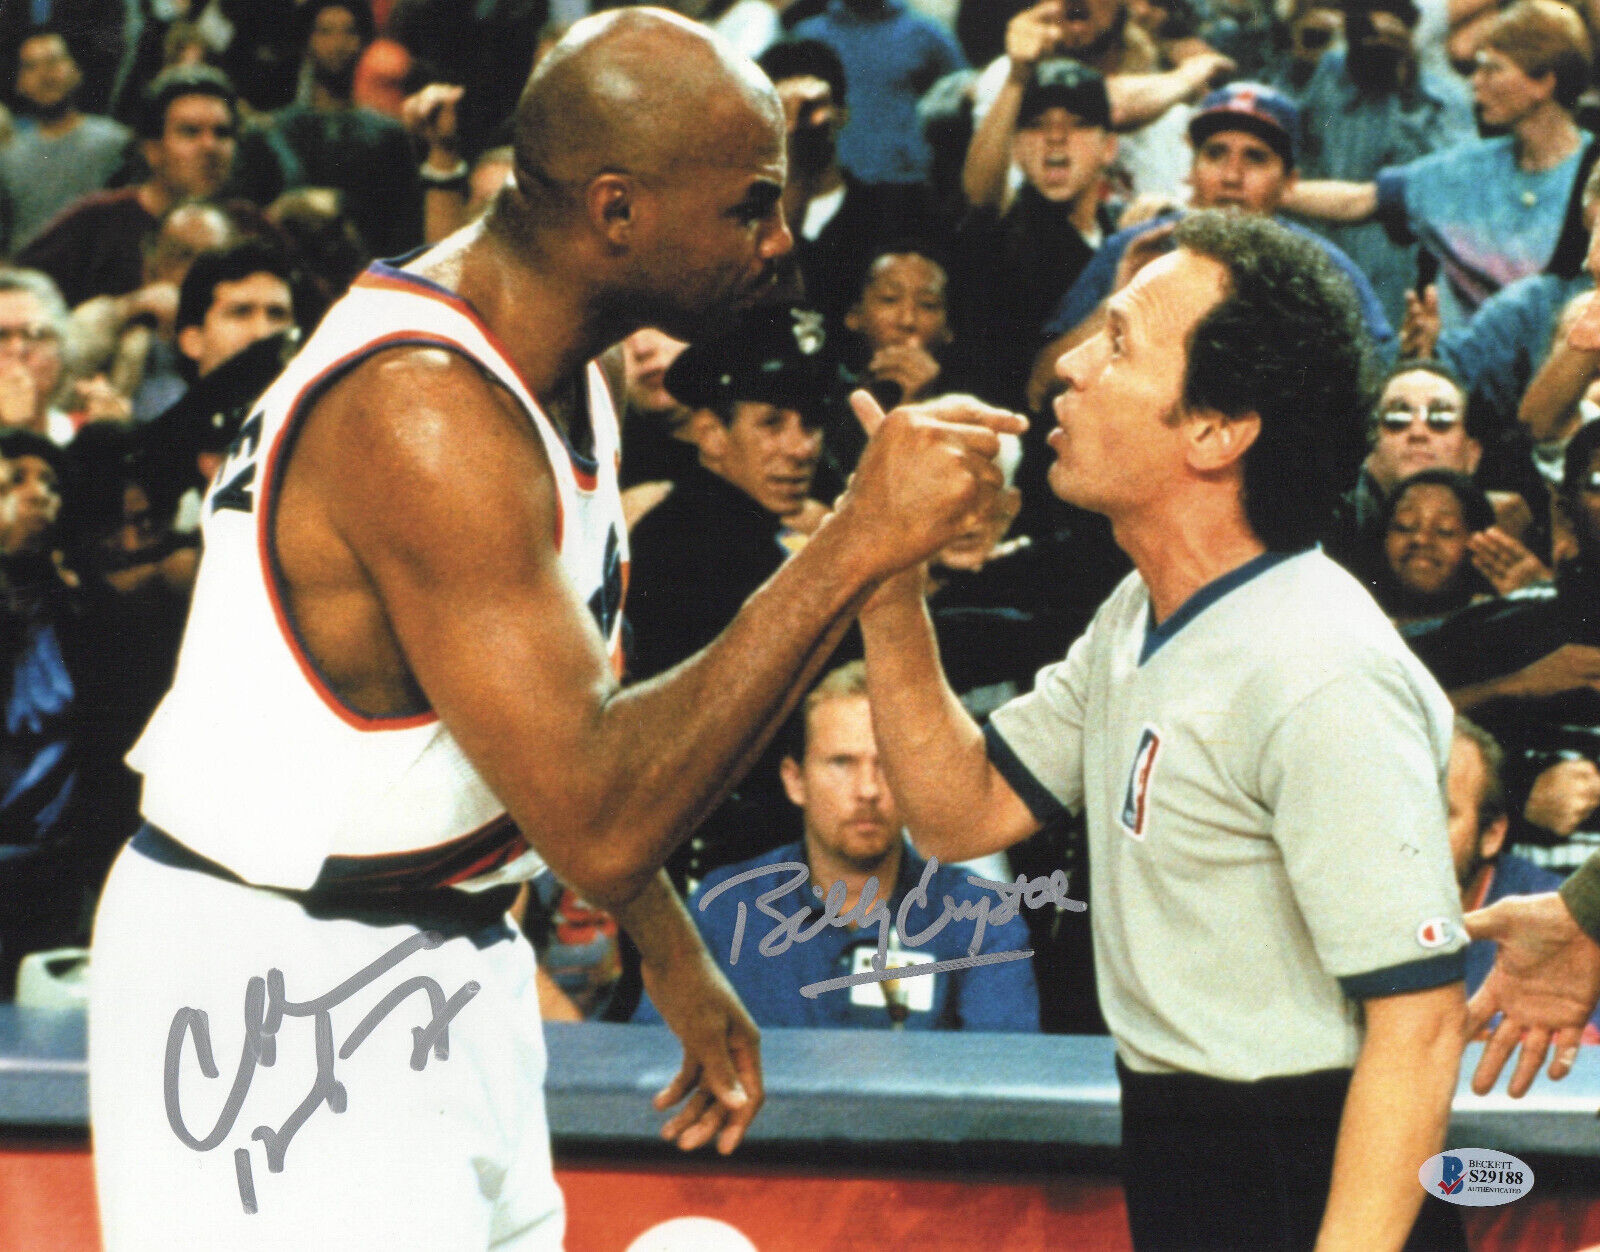 CHARLES BARKLEY BILLY CRYSTAL SIGNED AUTOGRAPH FORGET PARIS 11X14 PHOTO BECKETT